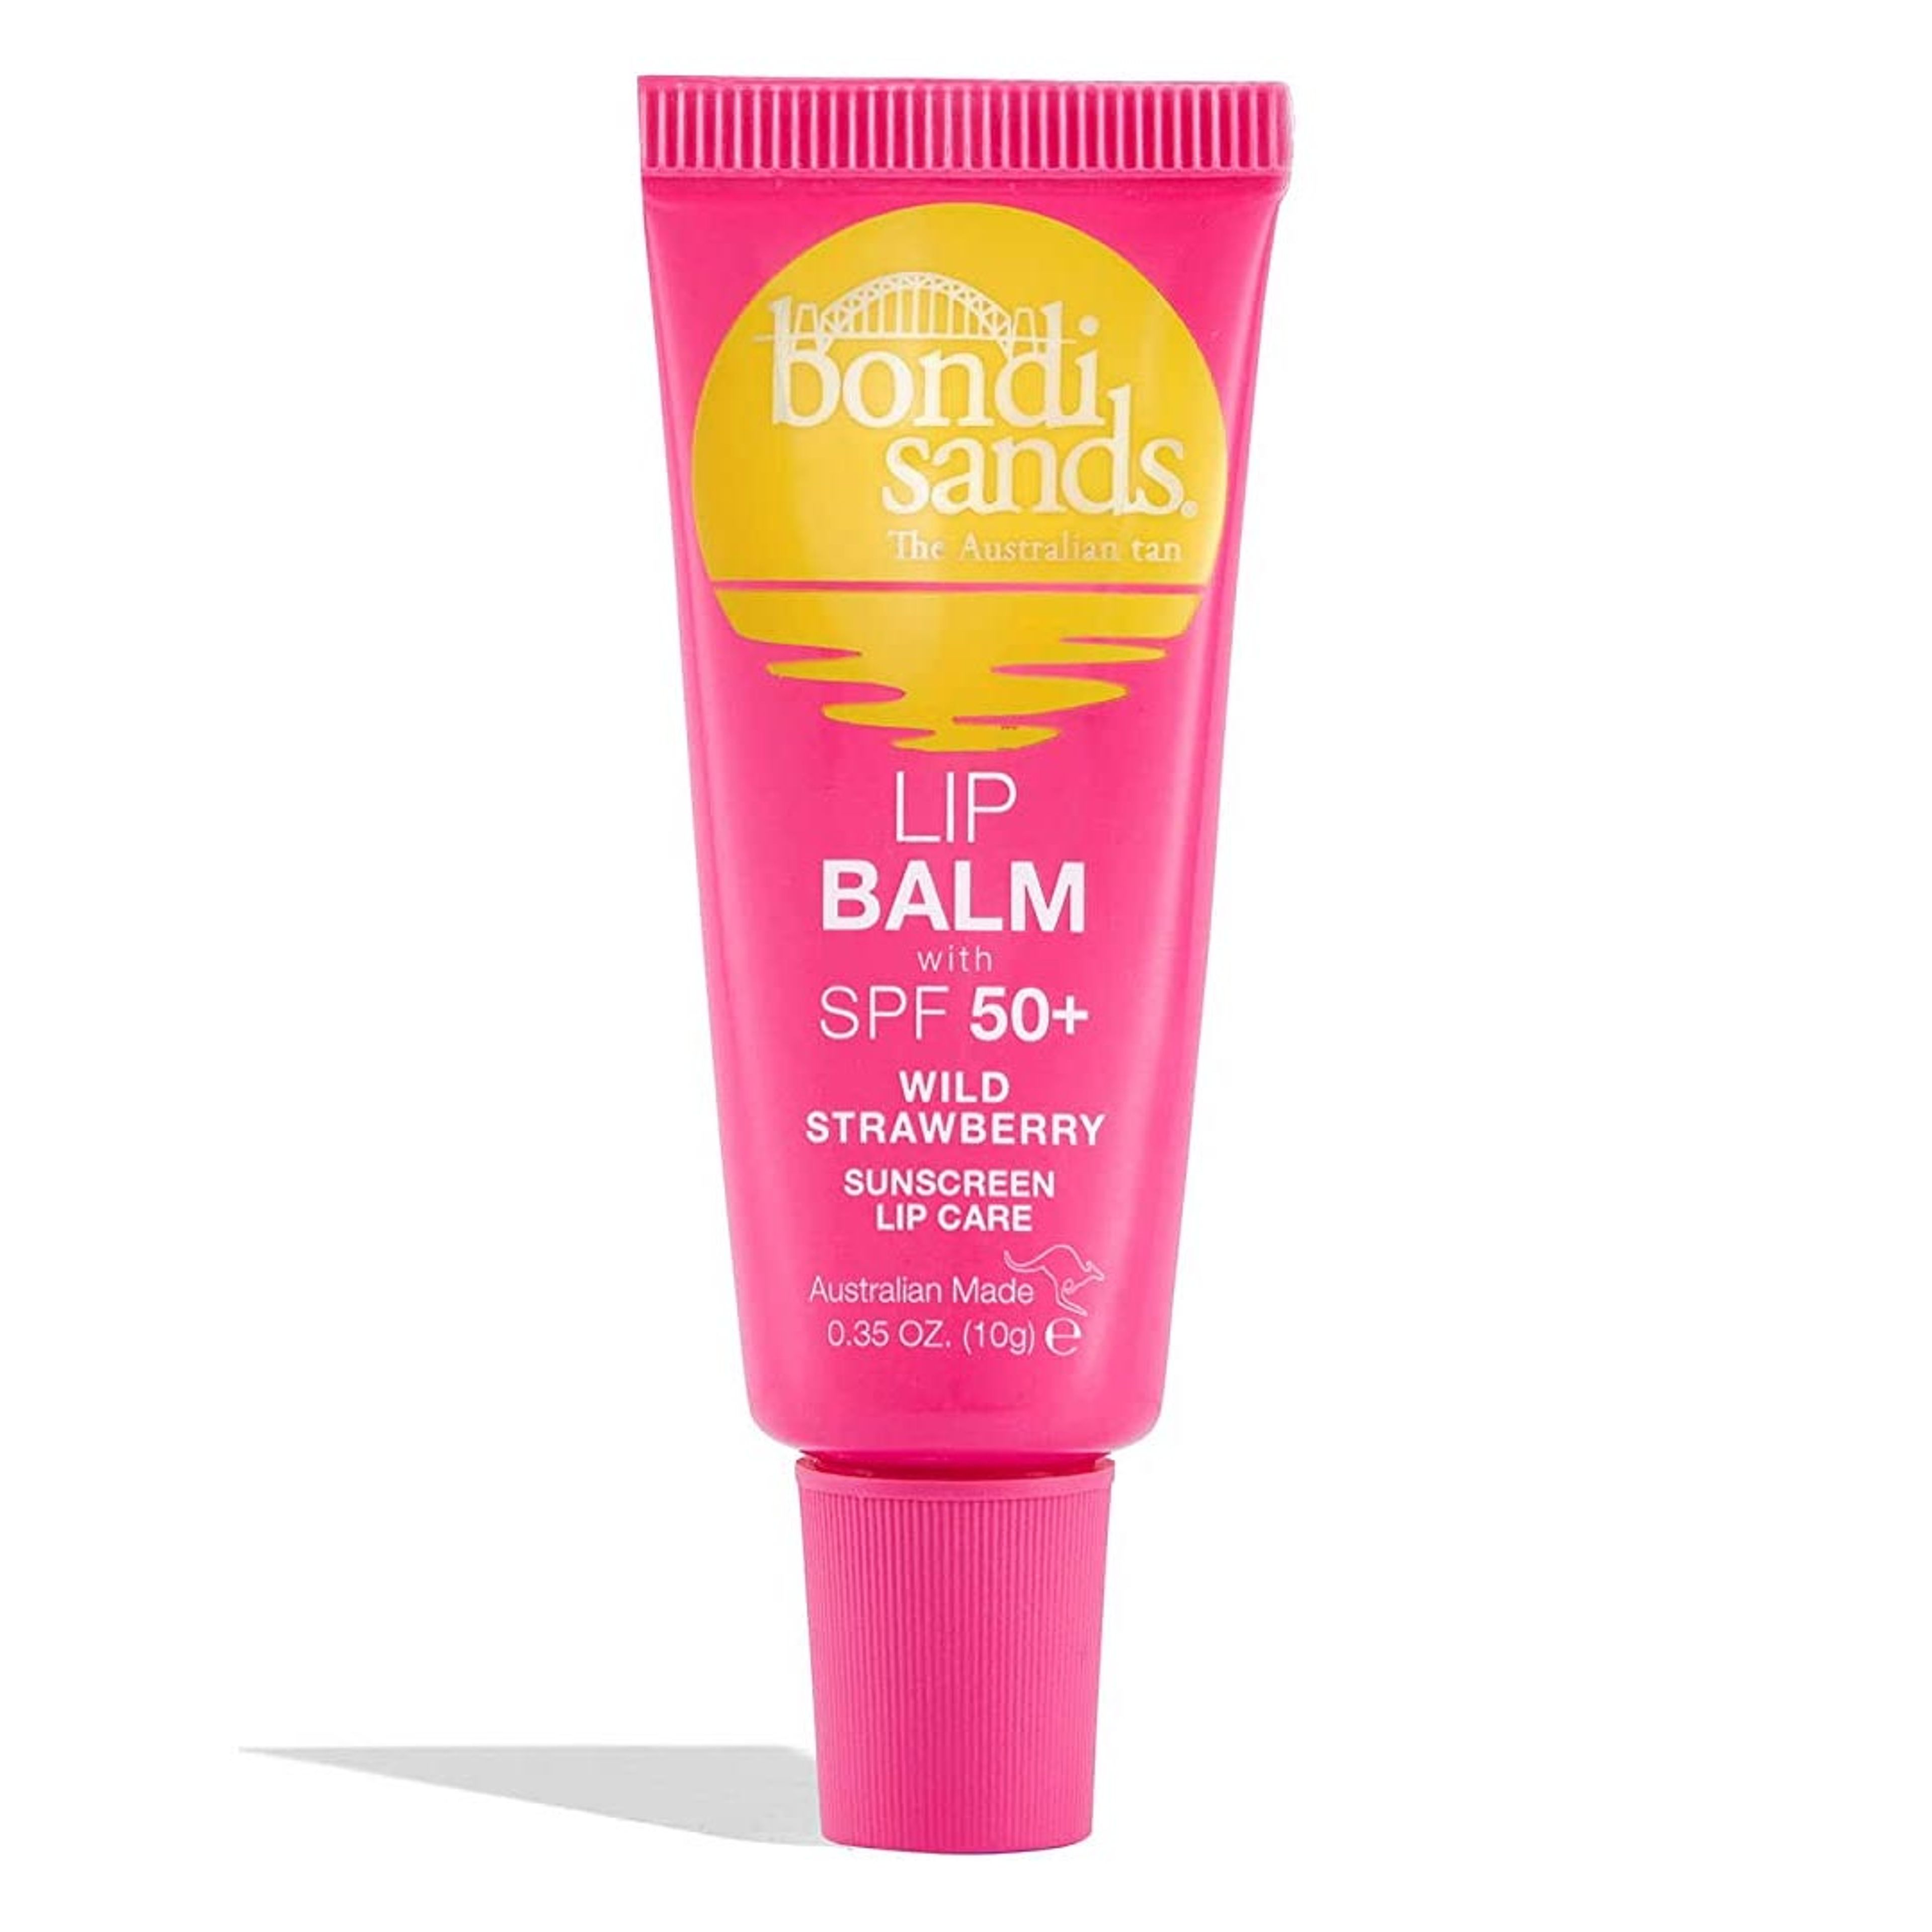 Lip Balm SPF50+ Wild Strawberry image 1 expanded